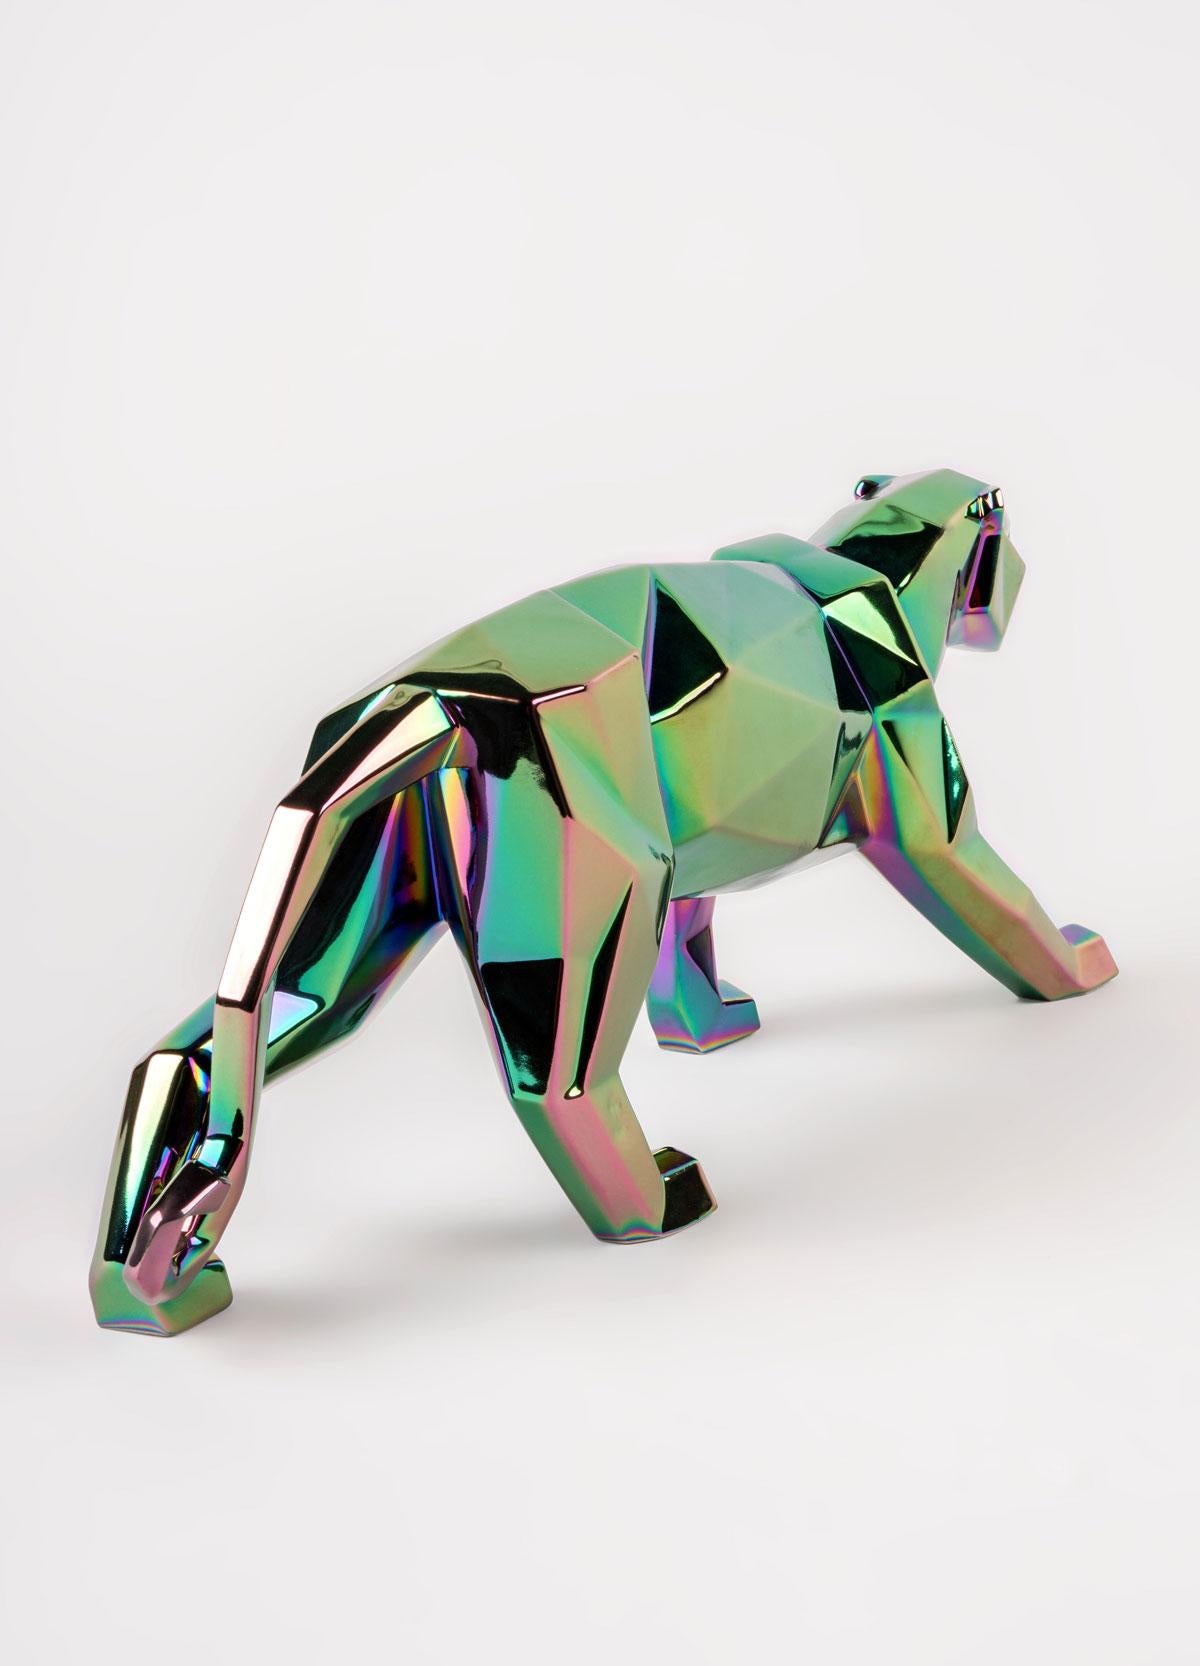 Hand-Crafted Panther Sculpture. Iridiscent For Sale